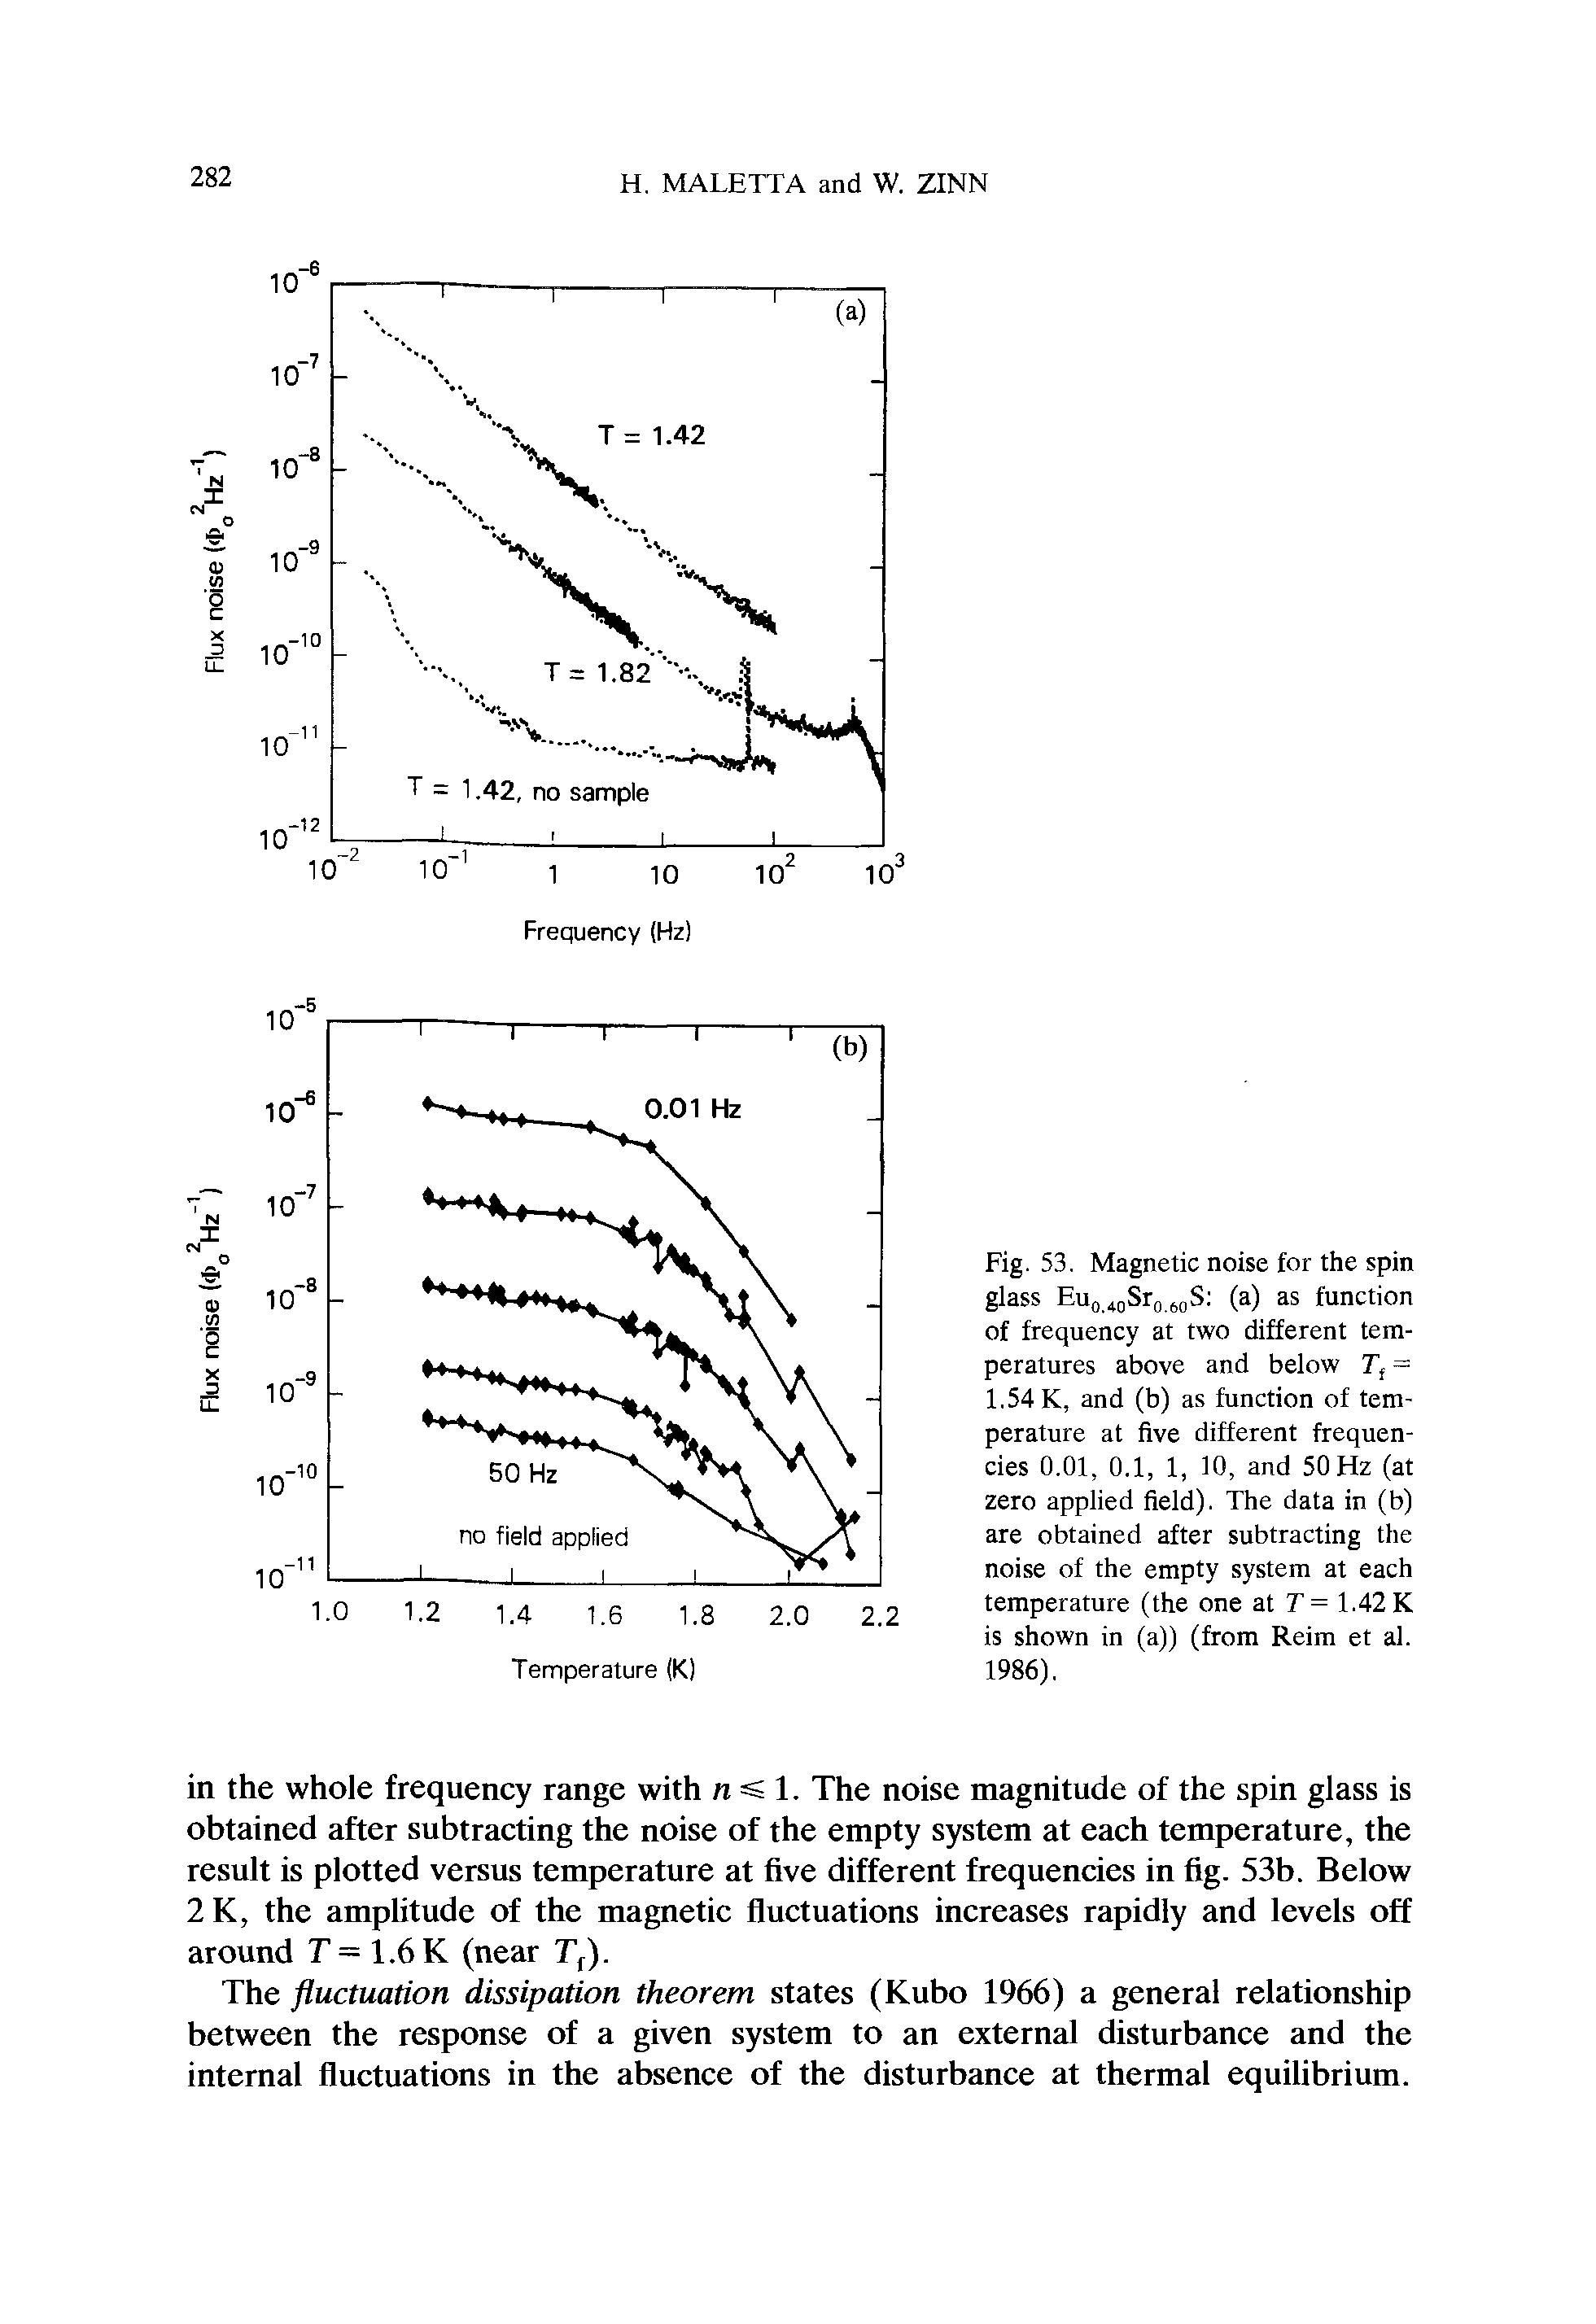 Fig. 53. Magnetic noise for the spin glass Eu . jpSro oS (a) as function of frequency at two different temperatures above and below r,= 1.54 K, and (b) as function of temperature at five different frequencies 0.01, 0.1, 1, 10, and 50 Hz (at zero applied field). The data in (b) are obtained after subtracting the noise of the empty system at each temperature (the one at T = 1.42 K is shown in (a)) (from Reim et al. 1986).